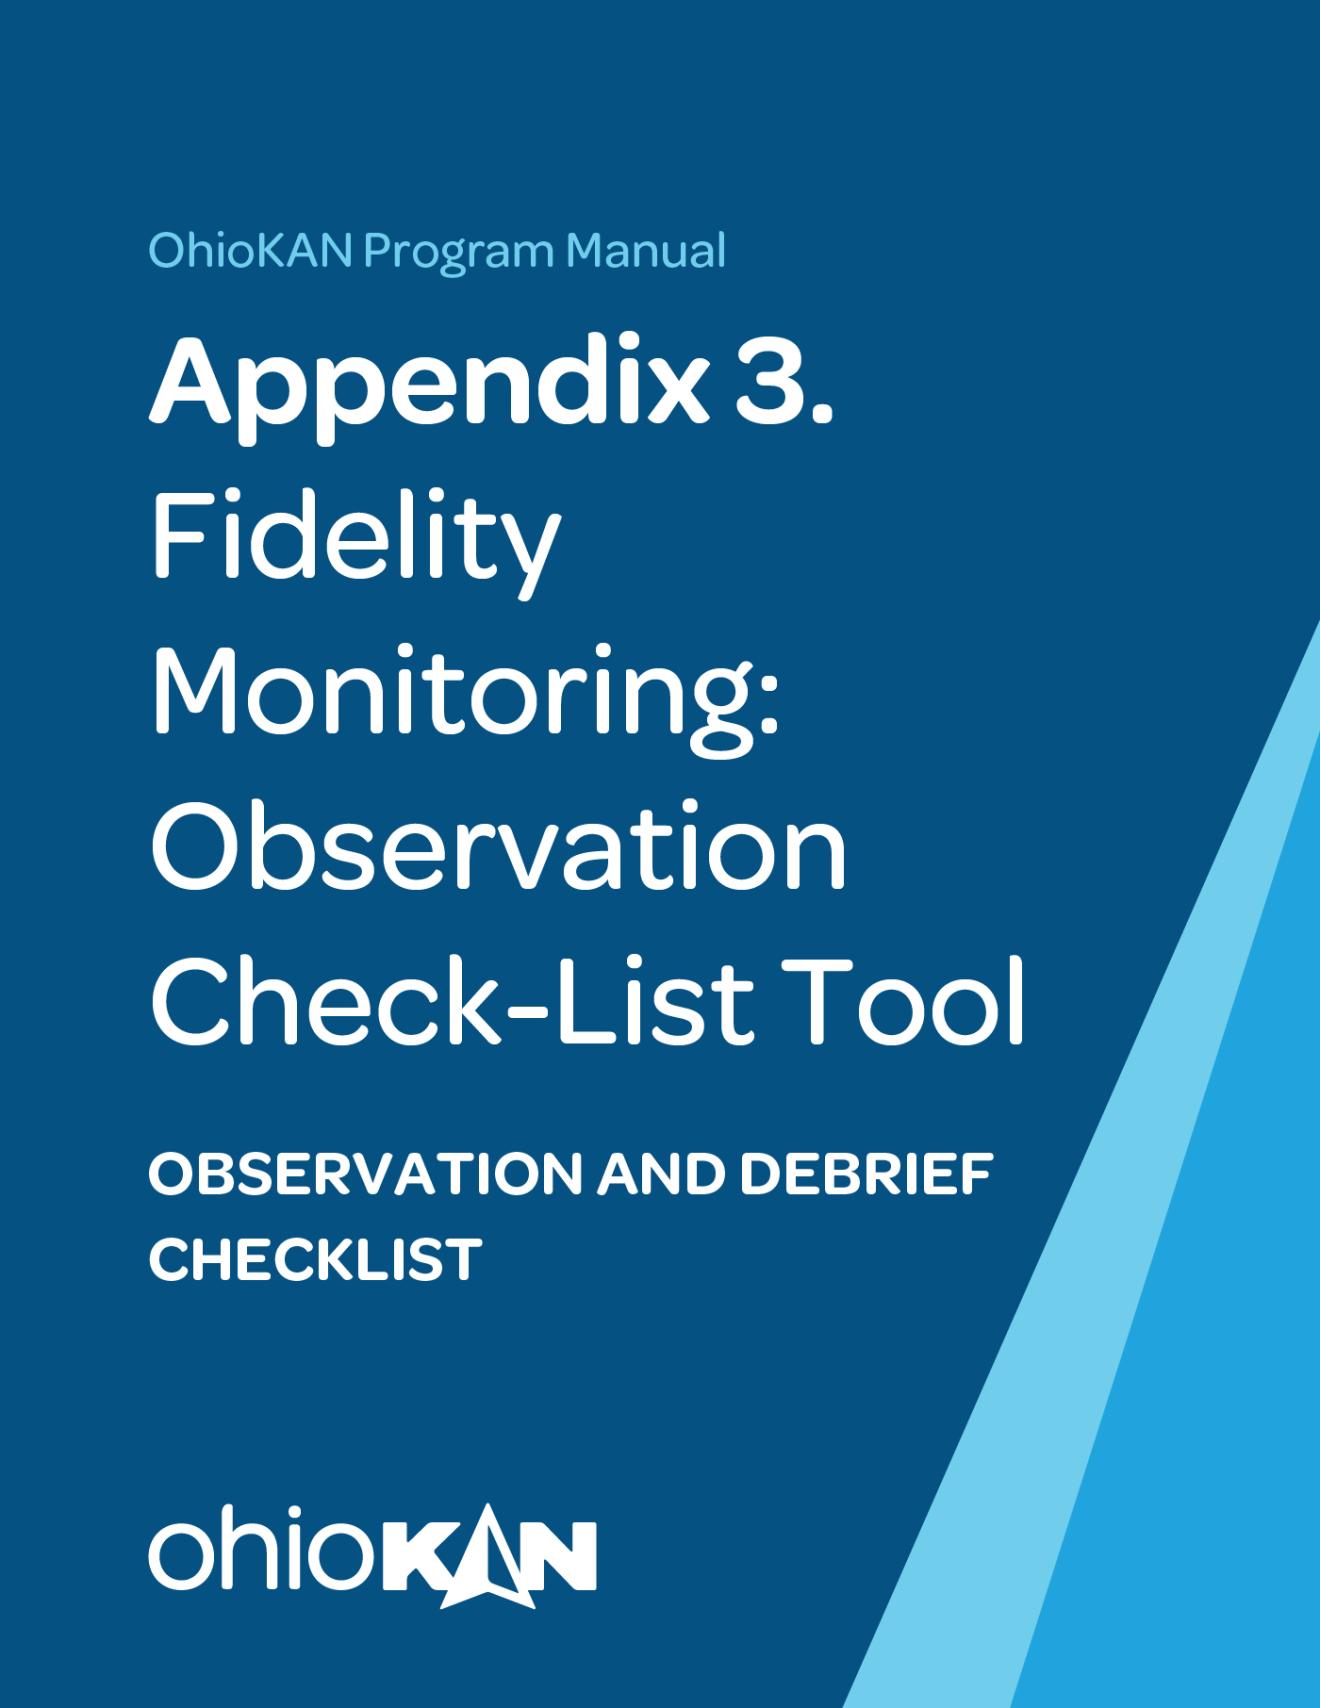 Appendix 3 Monitoring: Observation Check-List Tool